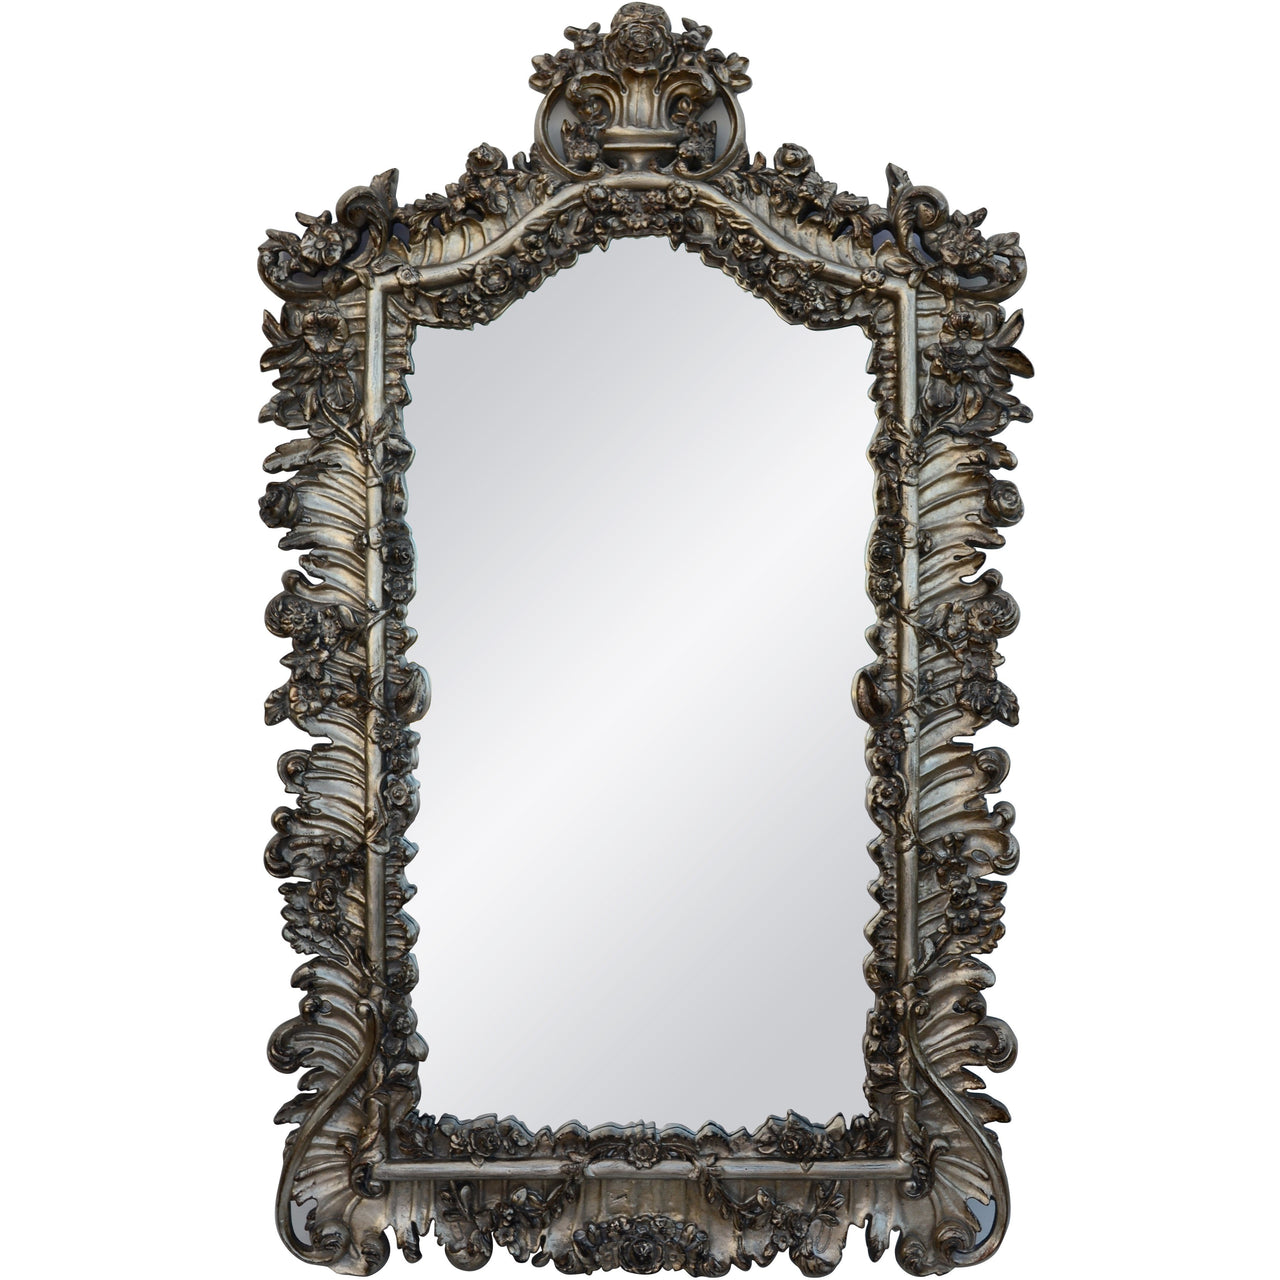 AFD Large Silver Florette Mirror Mirrors AFD Silver 